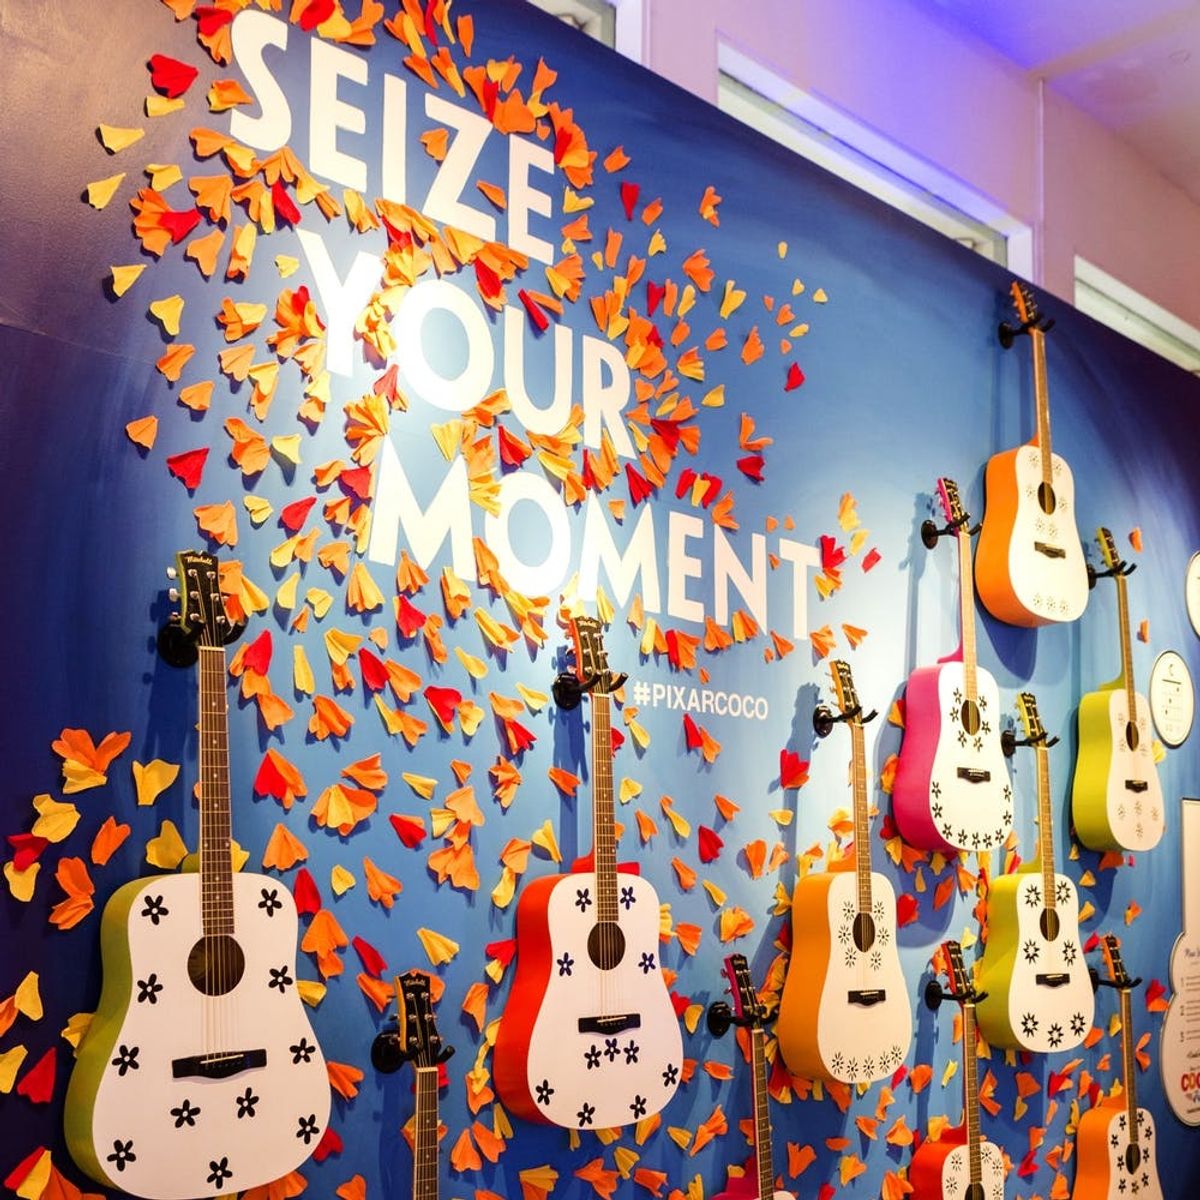 Disney/Pixar Celebrate “Coco” With an Interactive Music Experience at #CreateGood